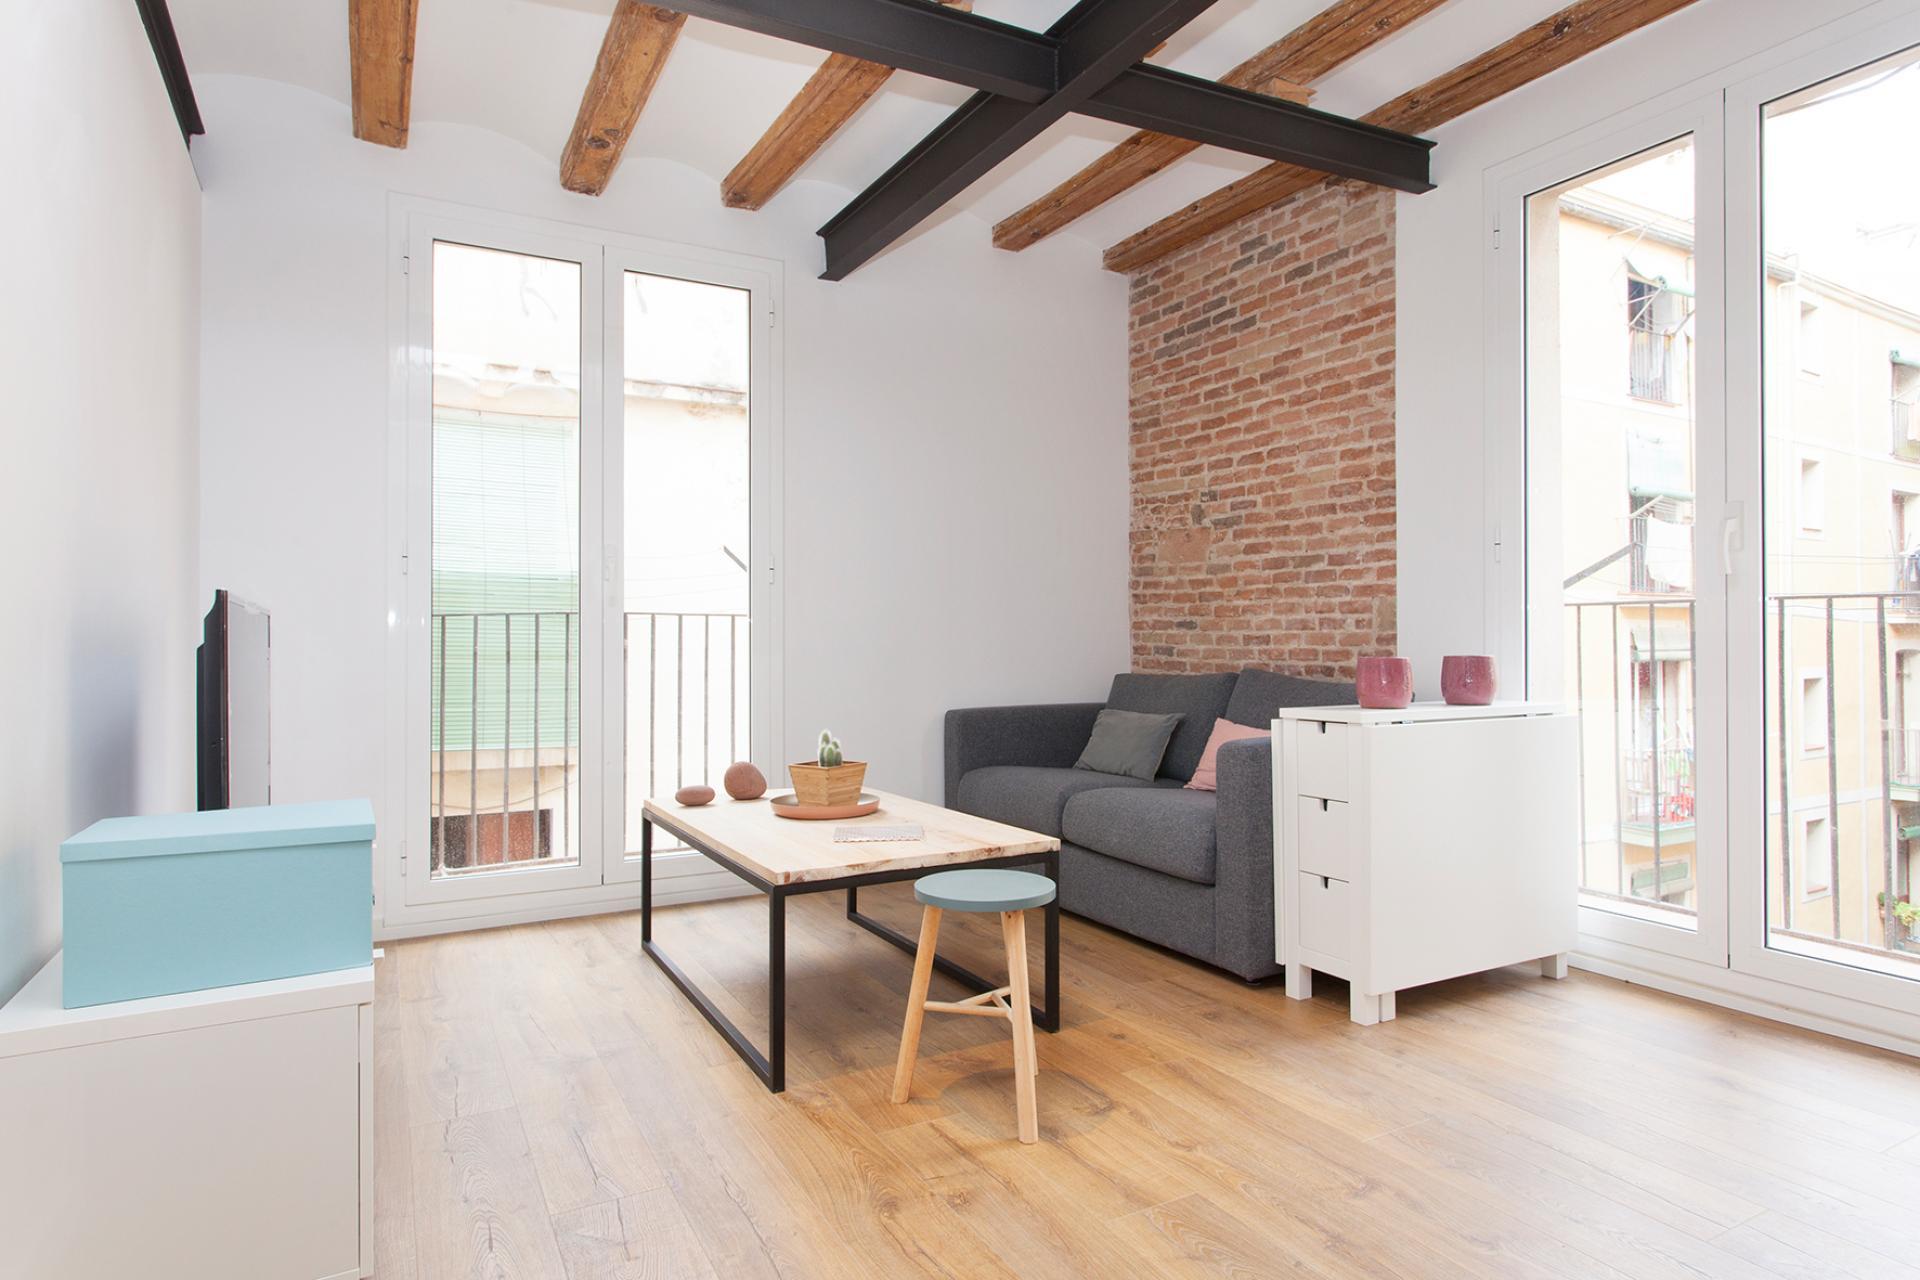 Apartment for rent in Raval, Barcelona. Apartments for rent in the c